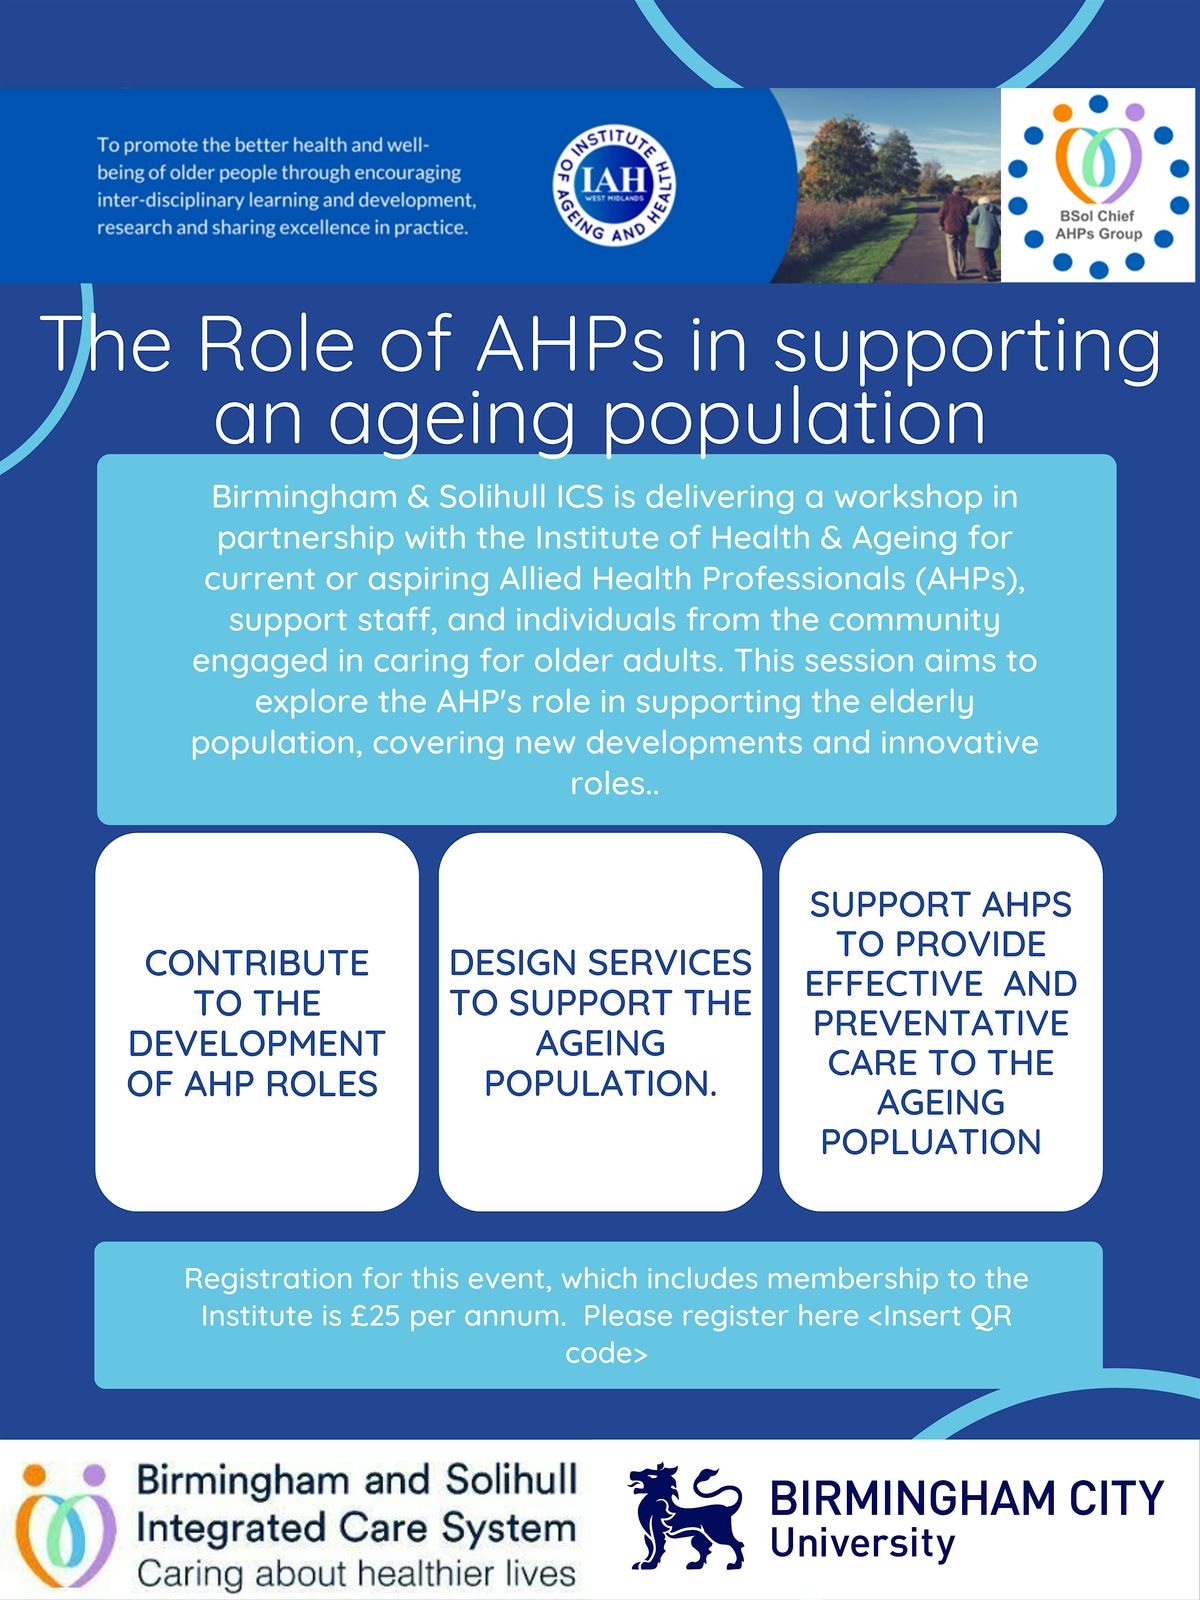 Role of Allied Health Professionals in supporting an ageing population